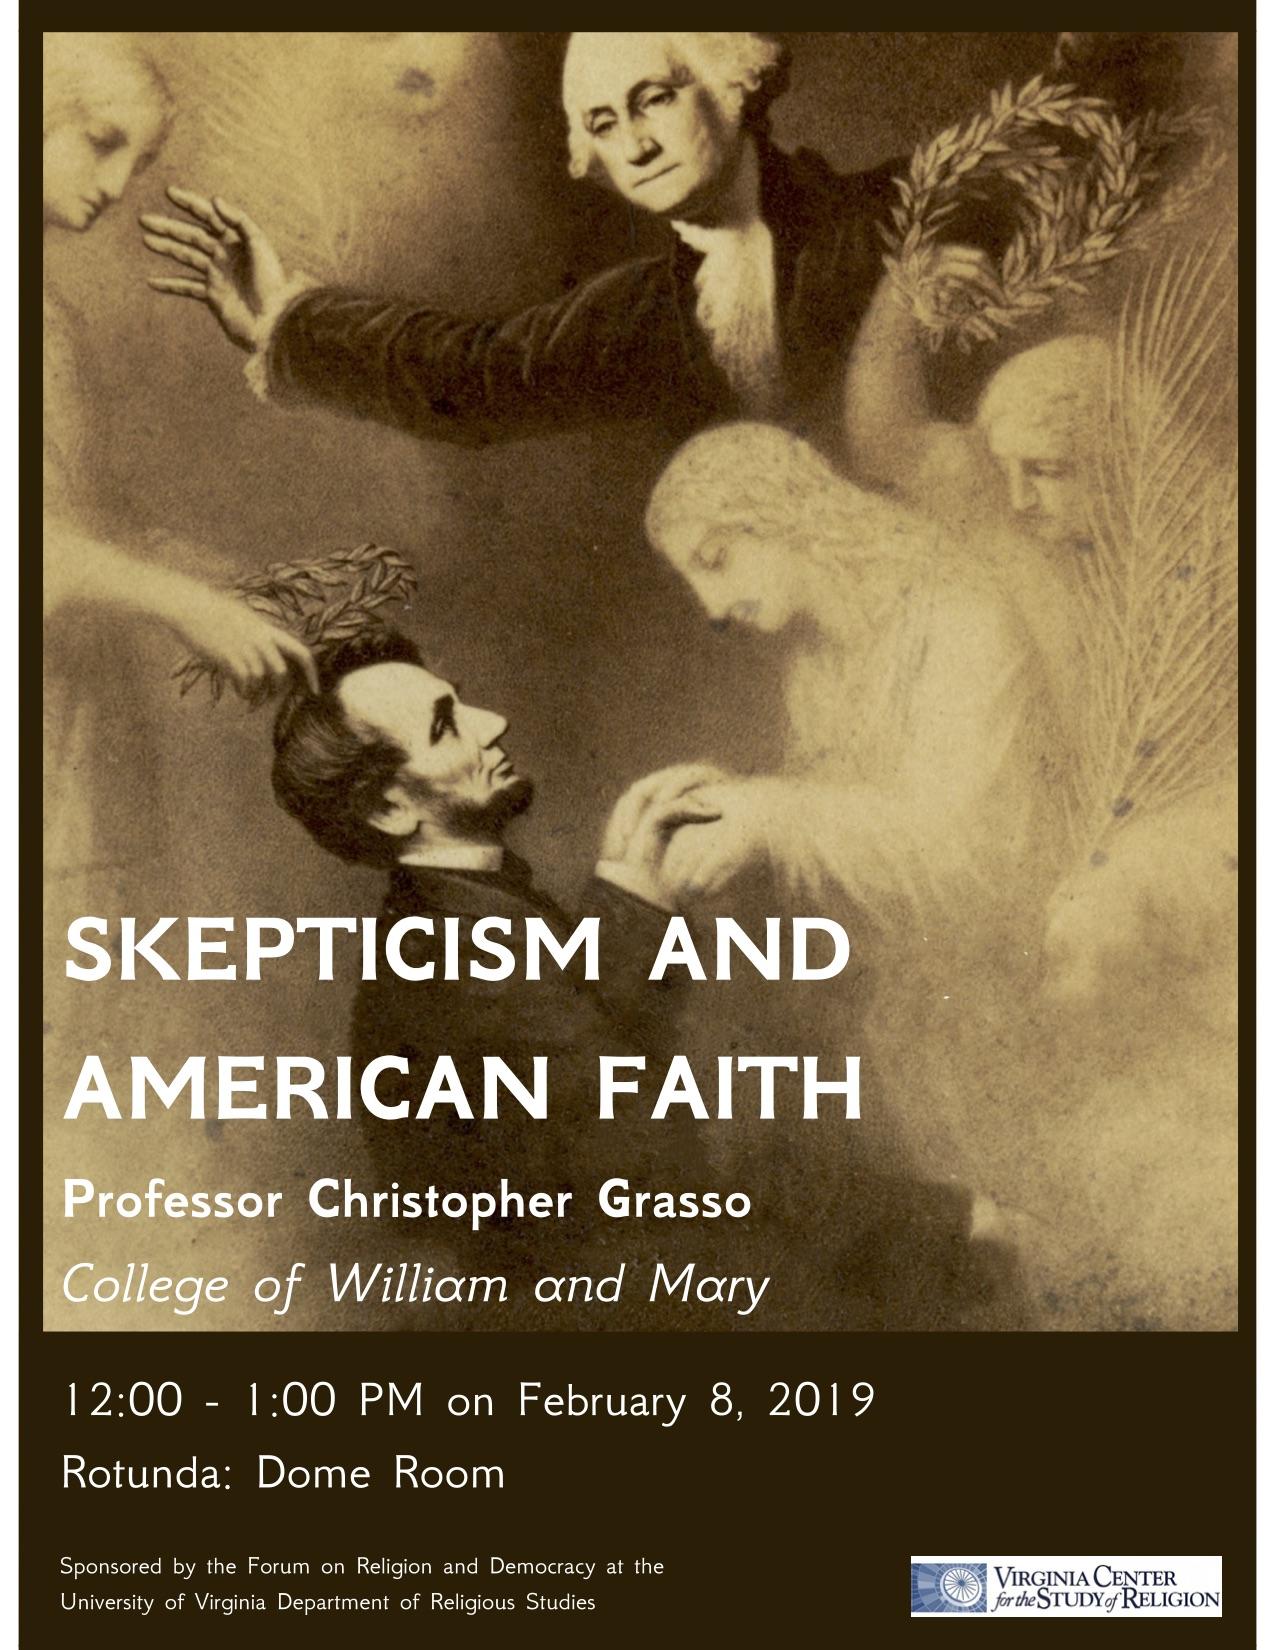 Publicity poster for "Skepticism and American Faith" event